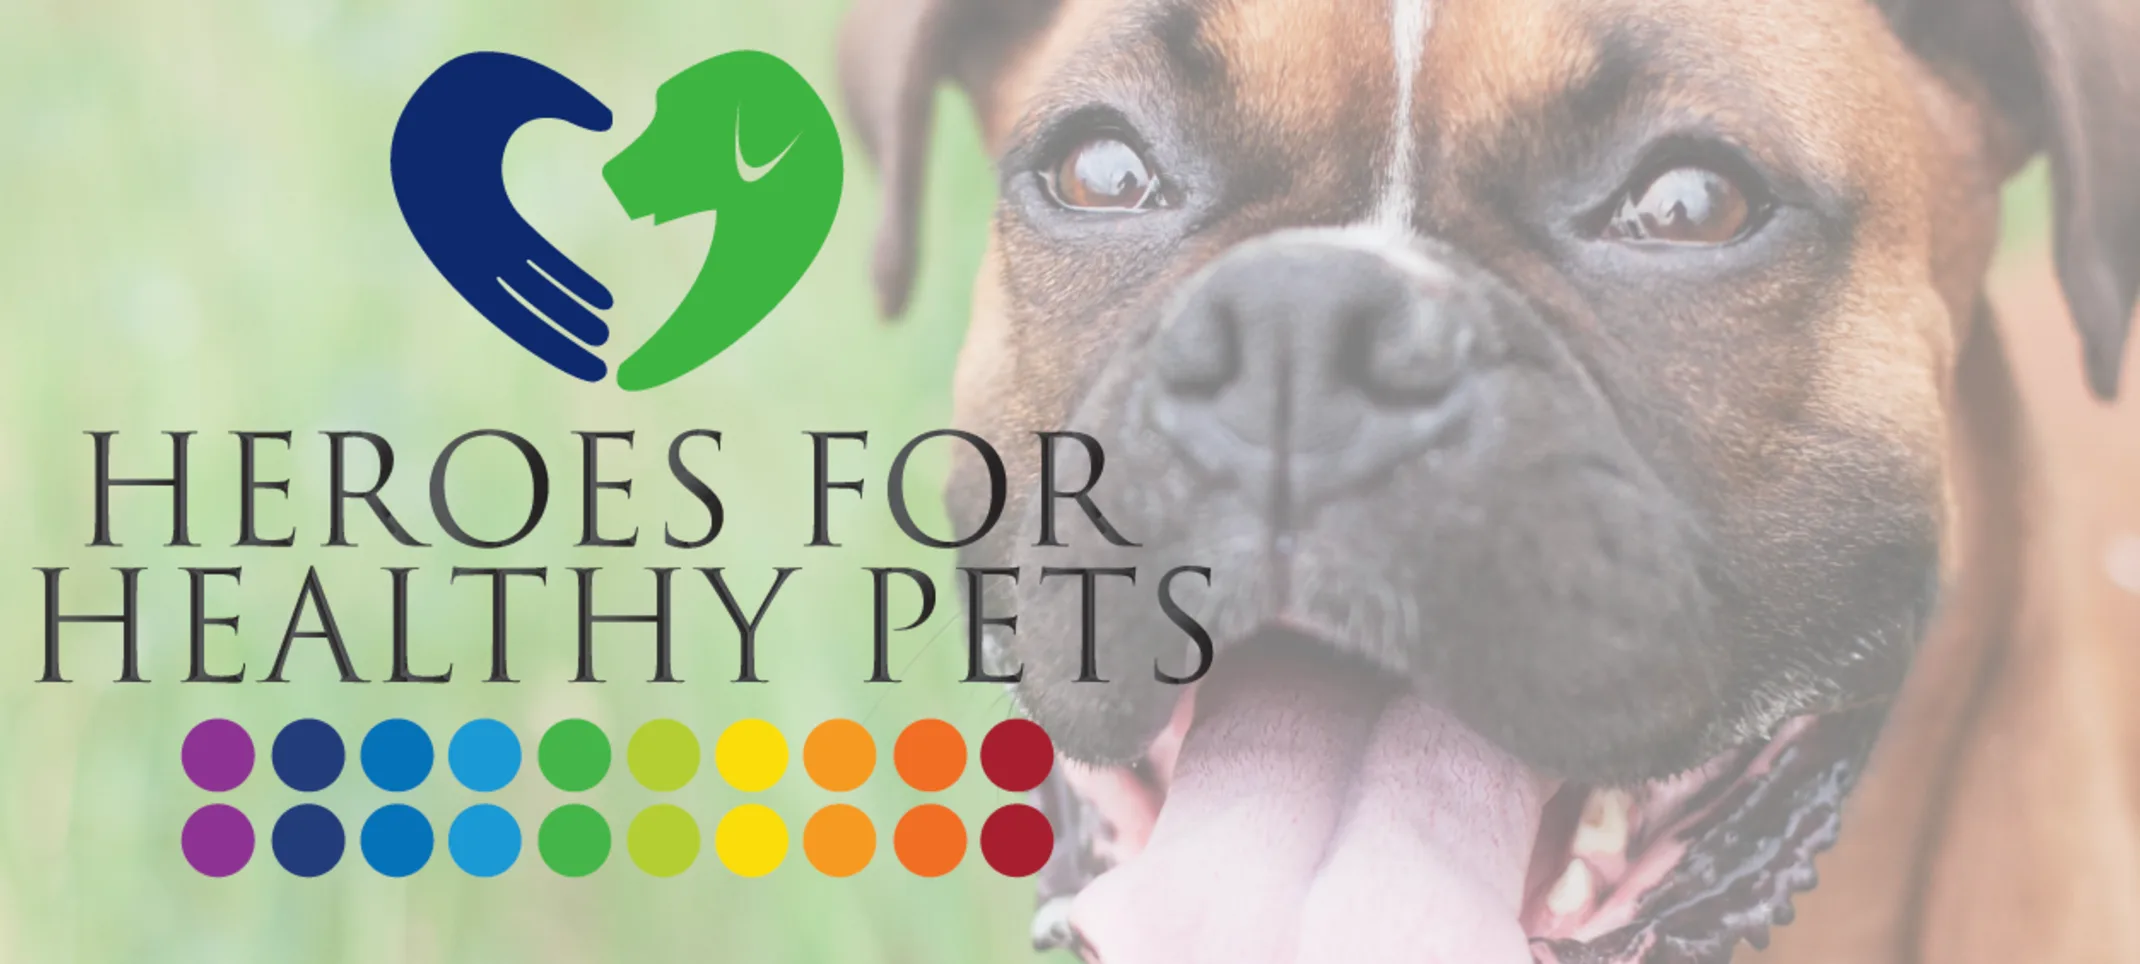 Heroes for Healthy Pets 